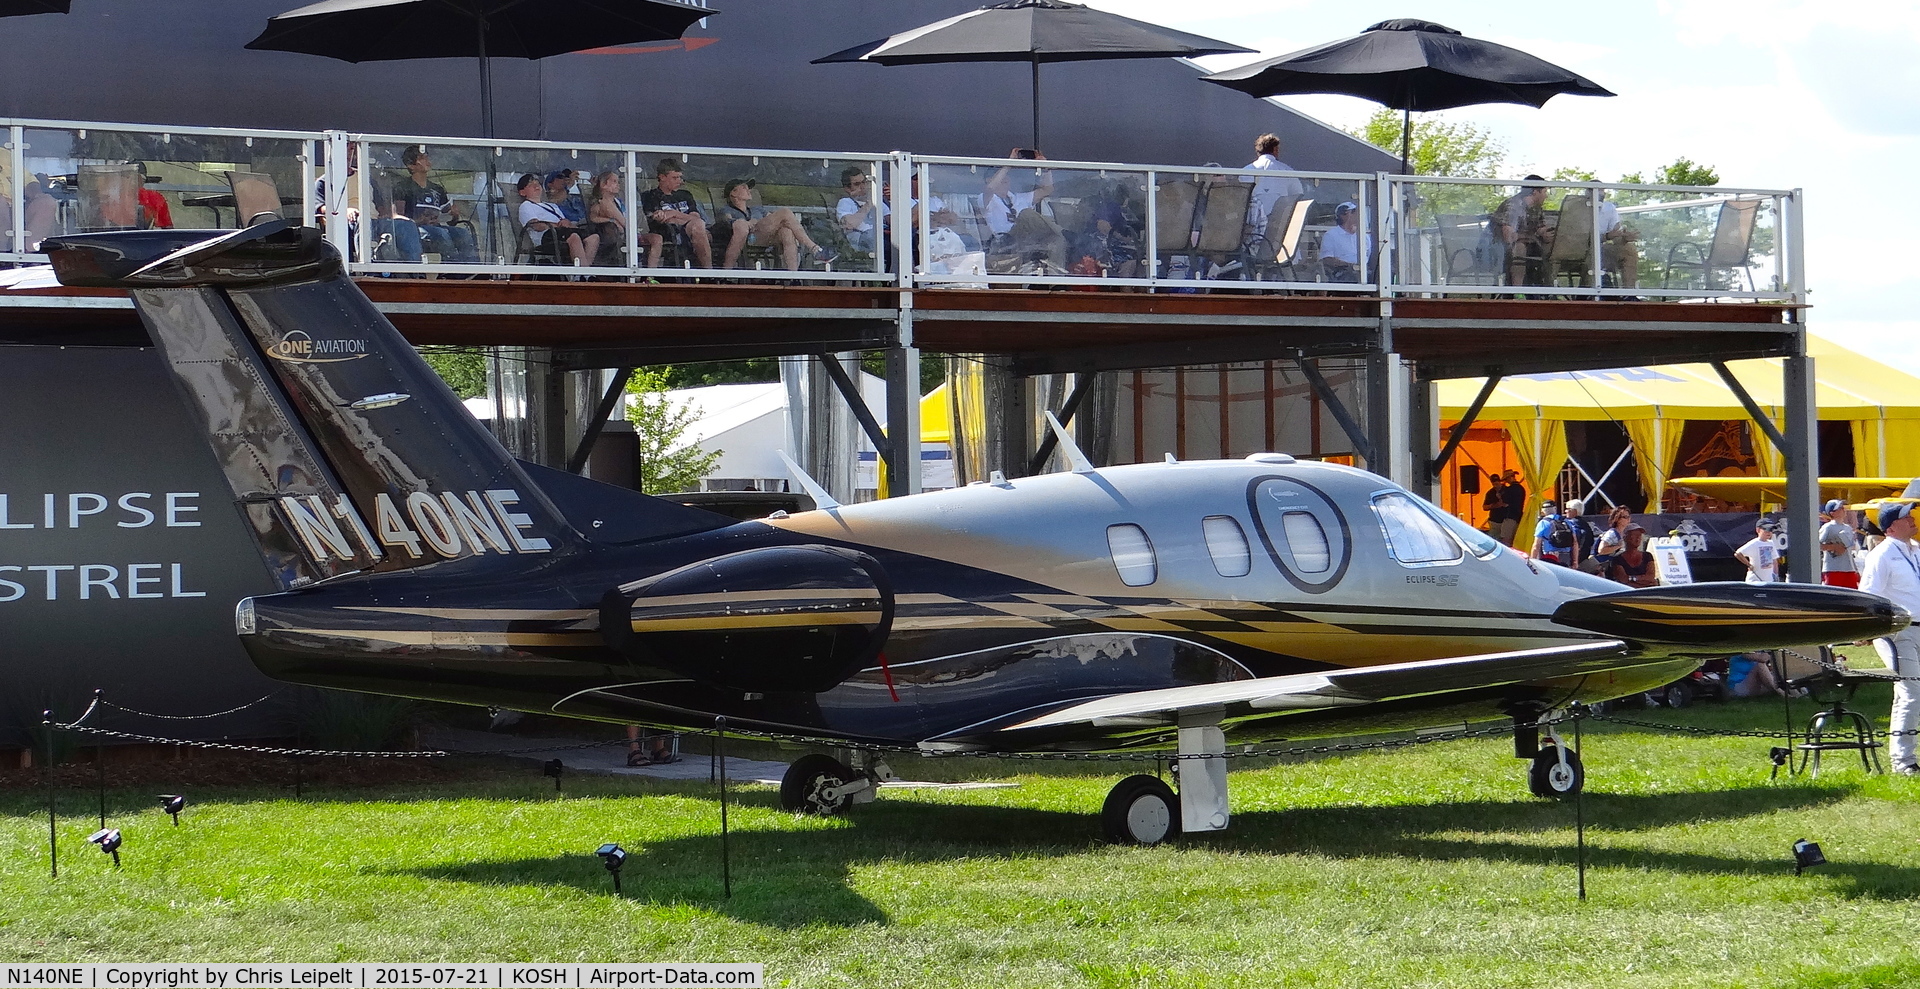 N140NE, 2007 Eclipse Aviation Corp EA500 C/N 000018, Group Four Partners LLC (Highland Park, IL) 2007 Eclipse EA500 on display at EAA AirVenture 2015.